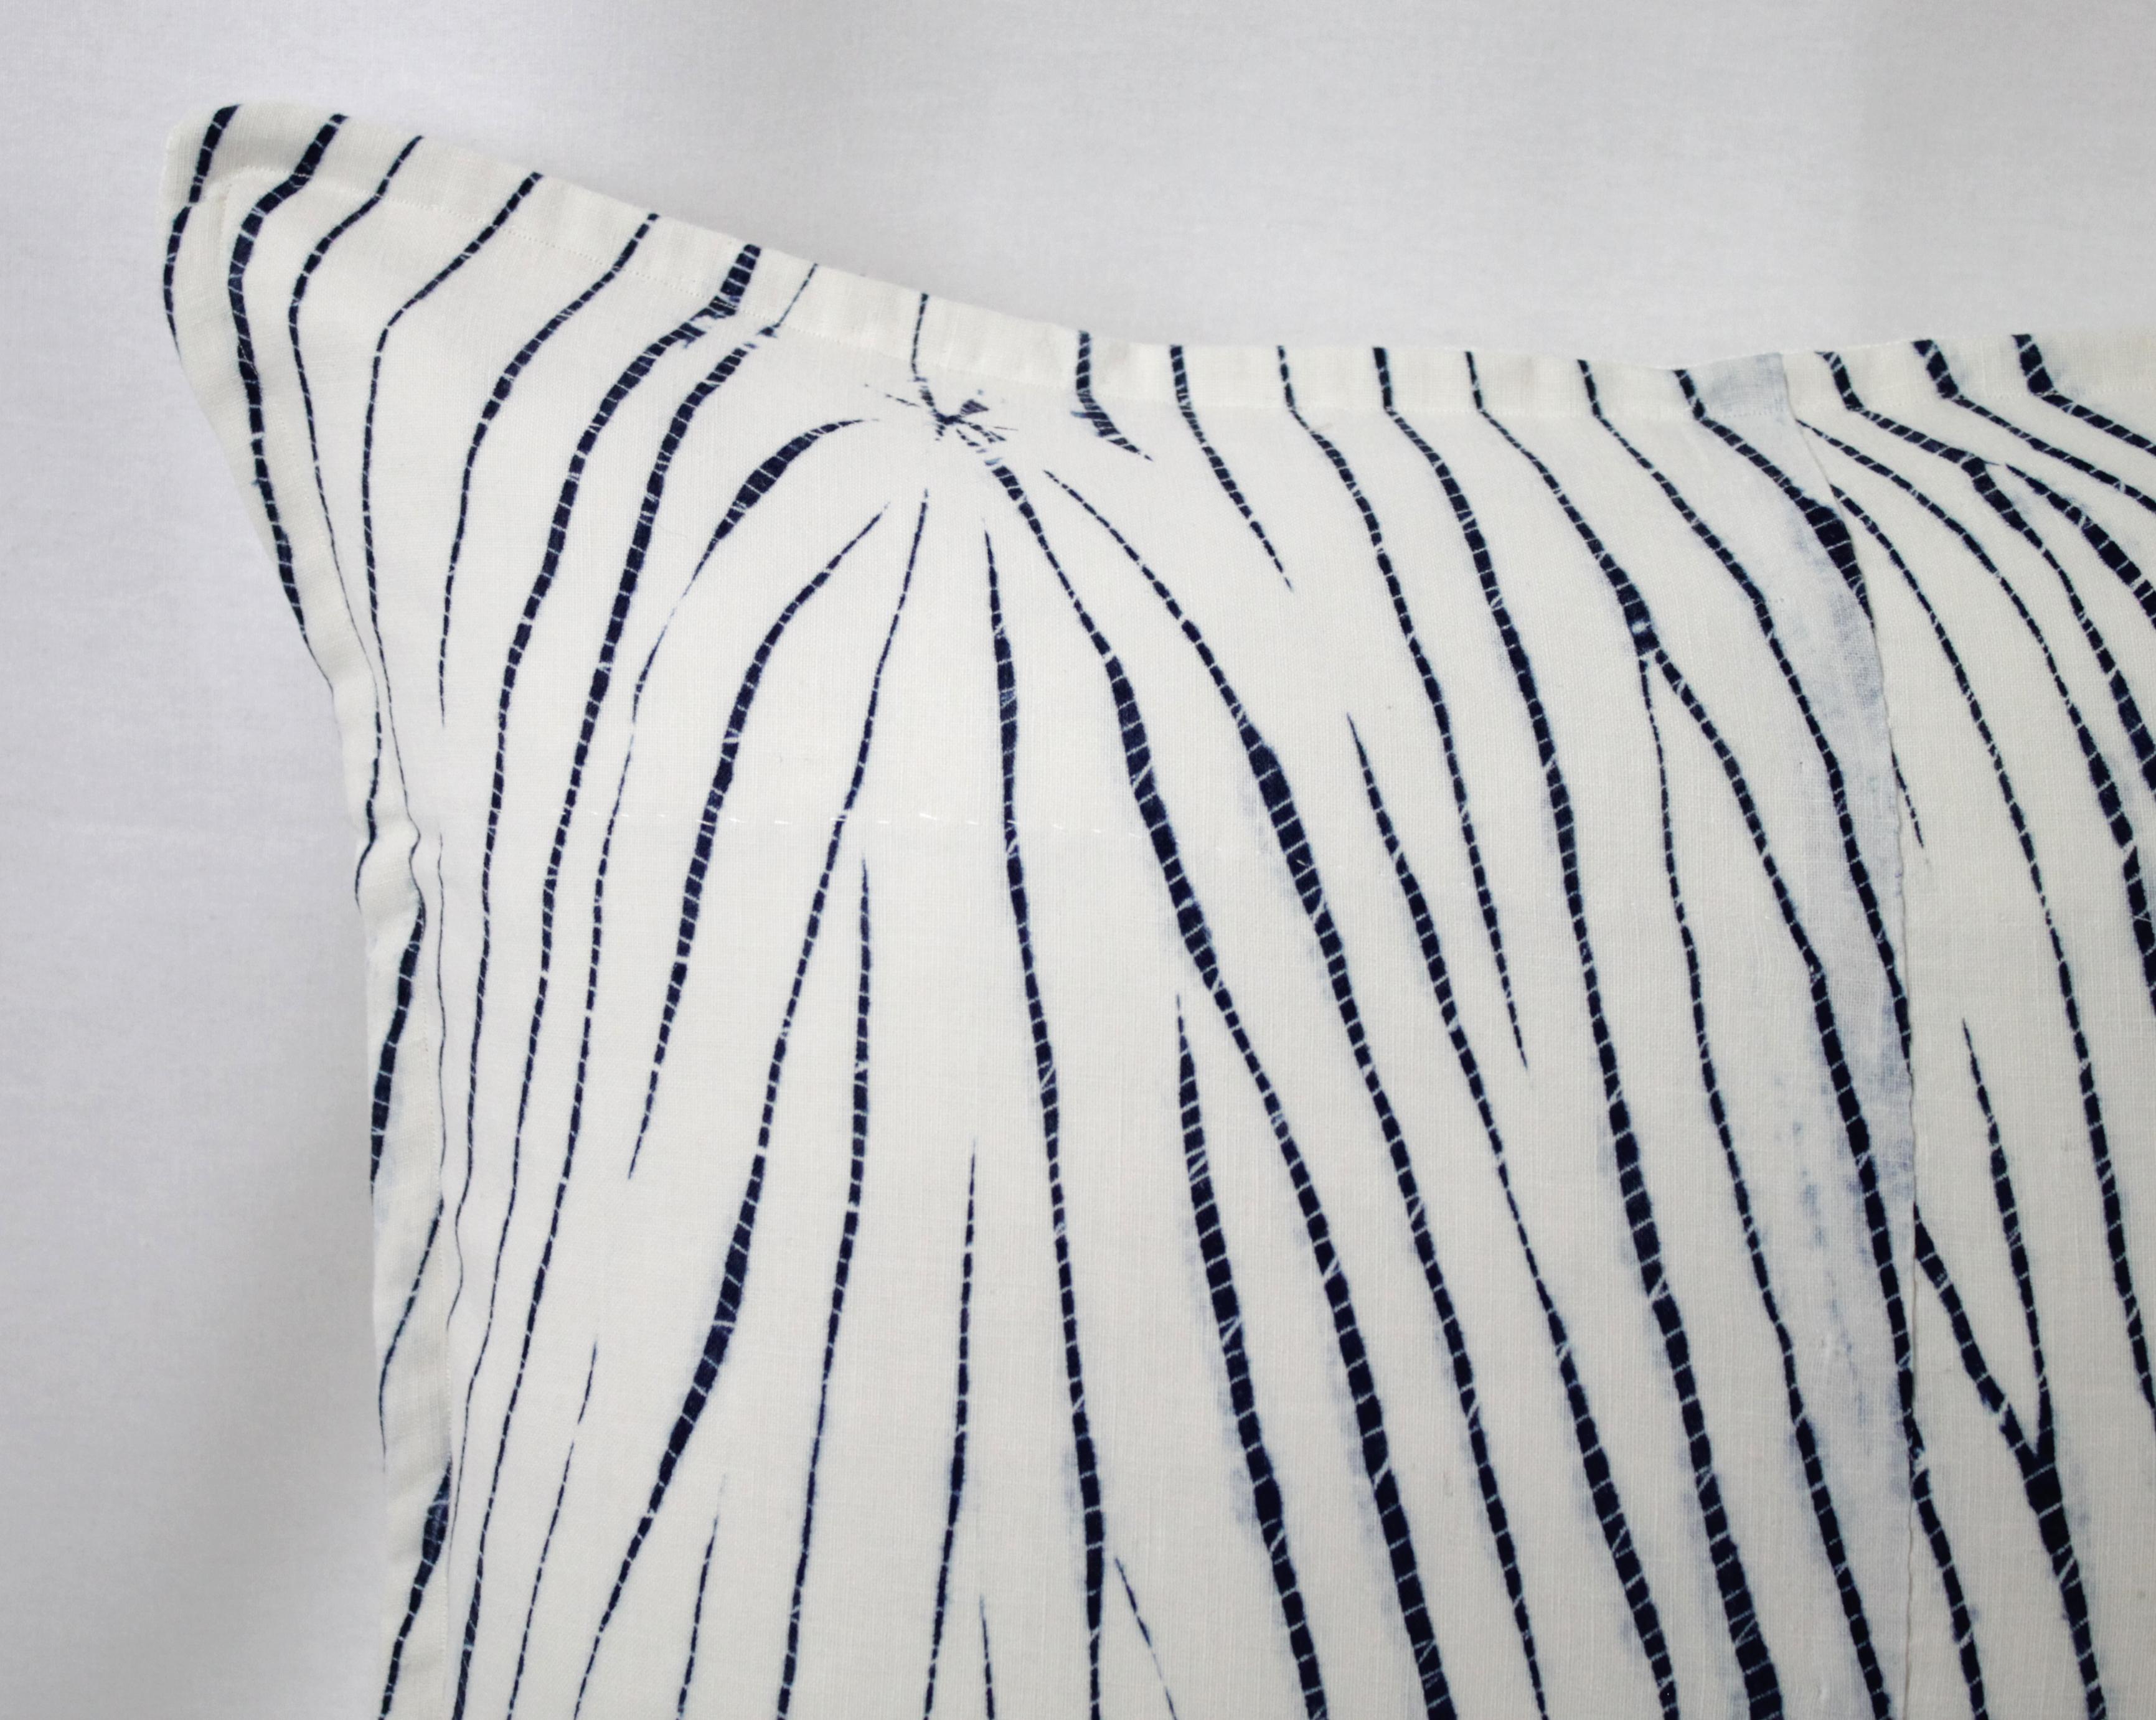 I was lucky enough to come across this fabulous piece of vintage cloth, dyed in the Shibori style. Shibori is a Japanese manual resist dyeing technique, which produces patterns on the fabric, dating back to the 18th century. This is a cotton back